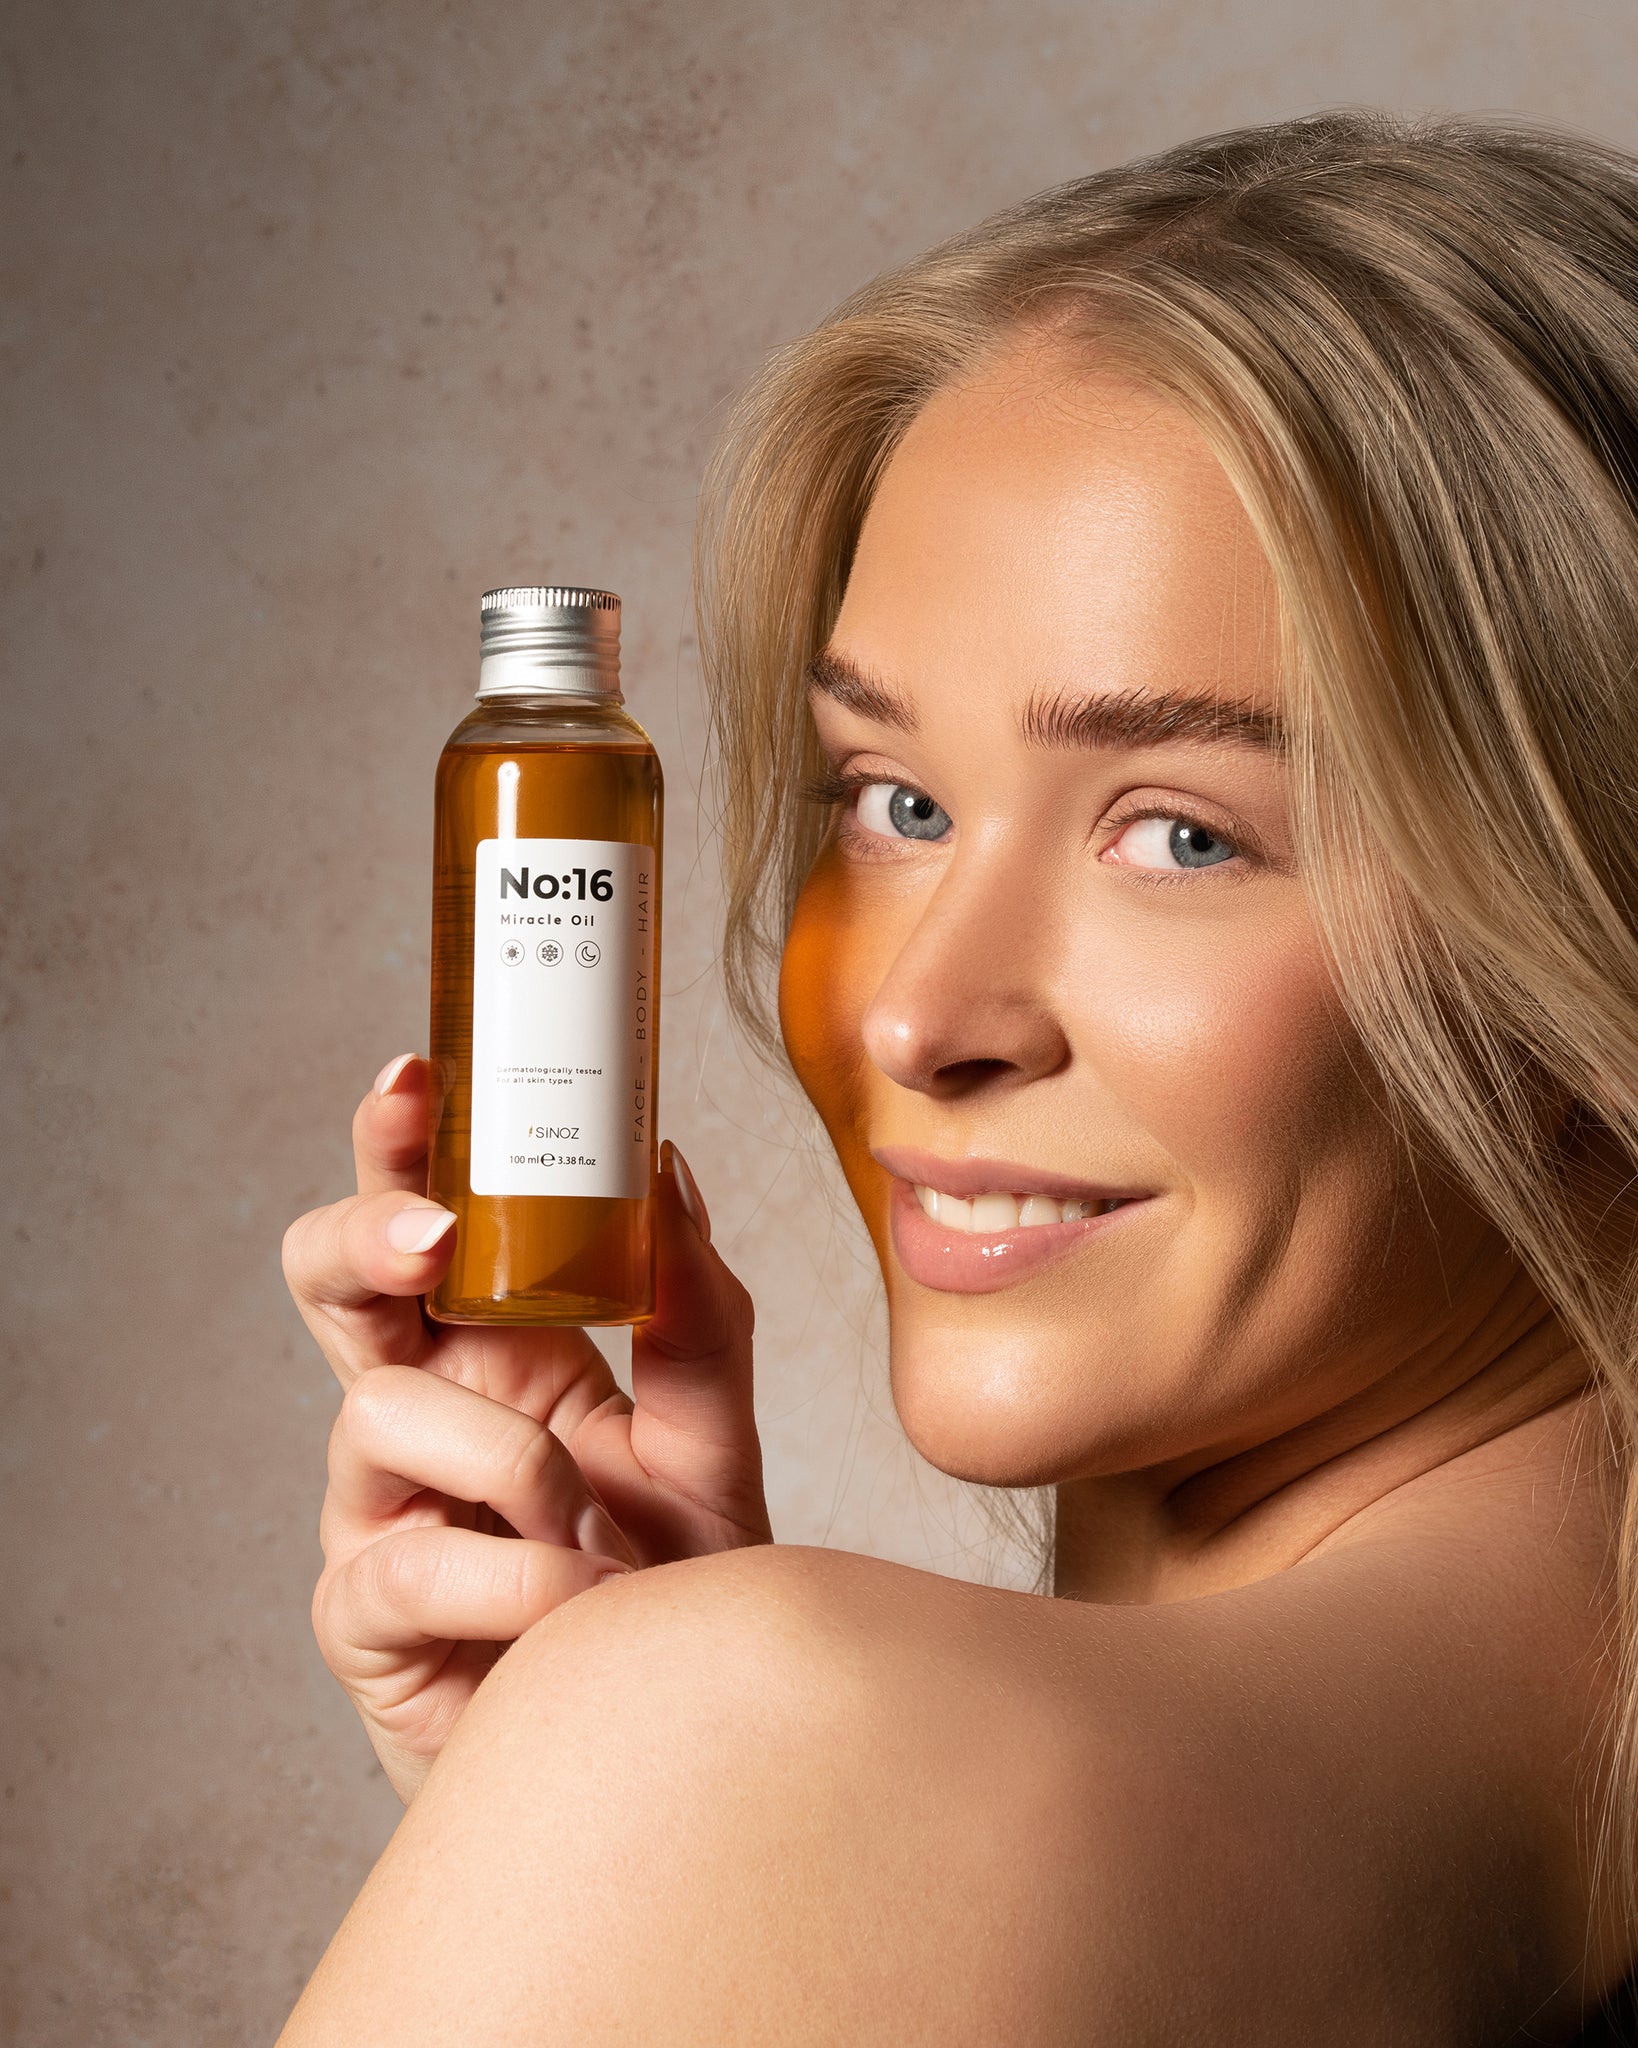 The Wonders of the No:16 Miracle Oil